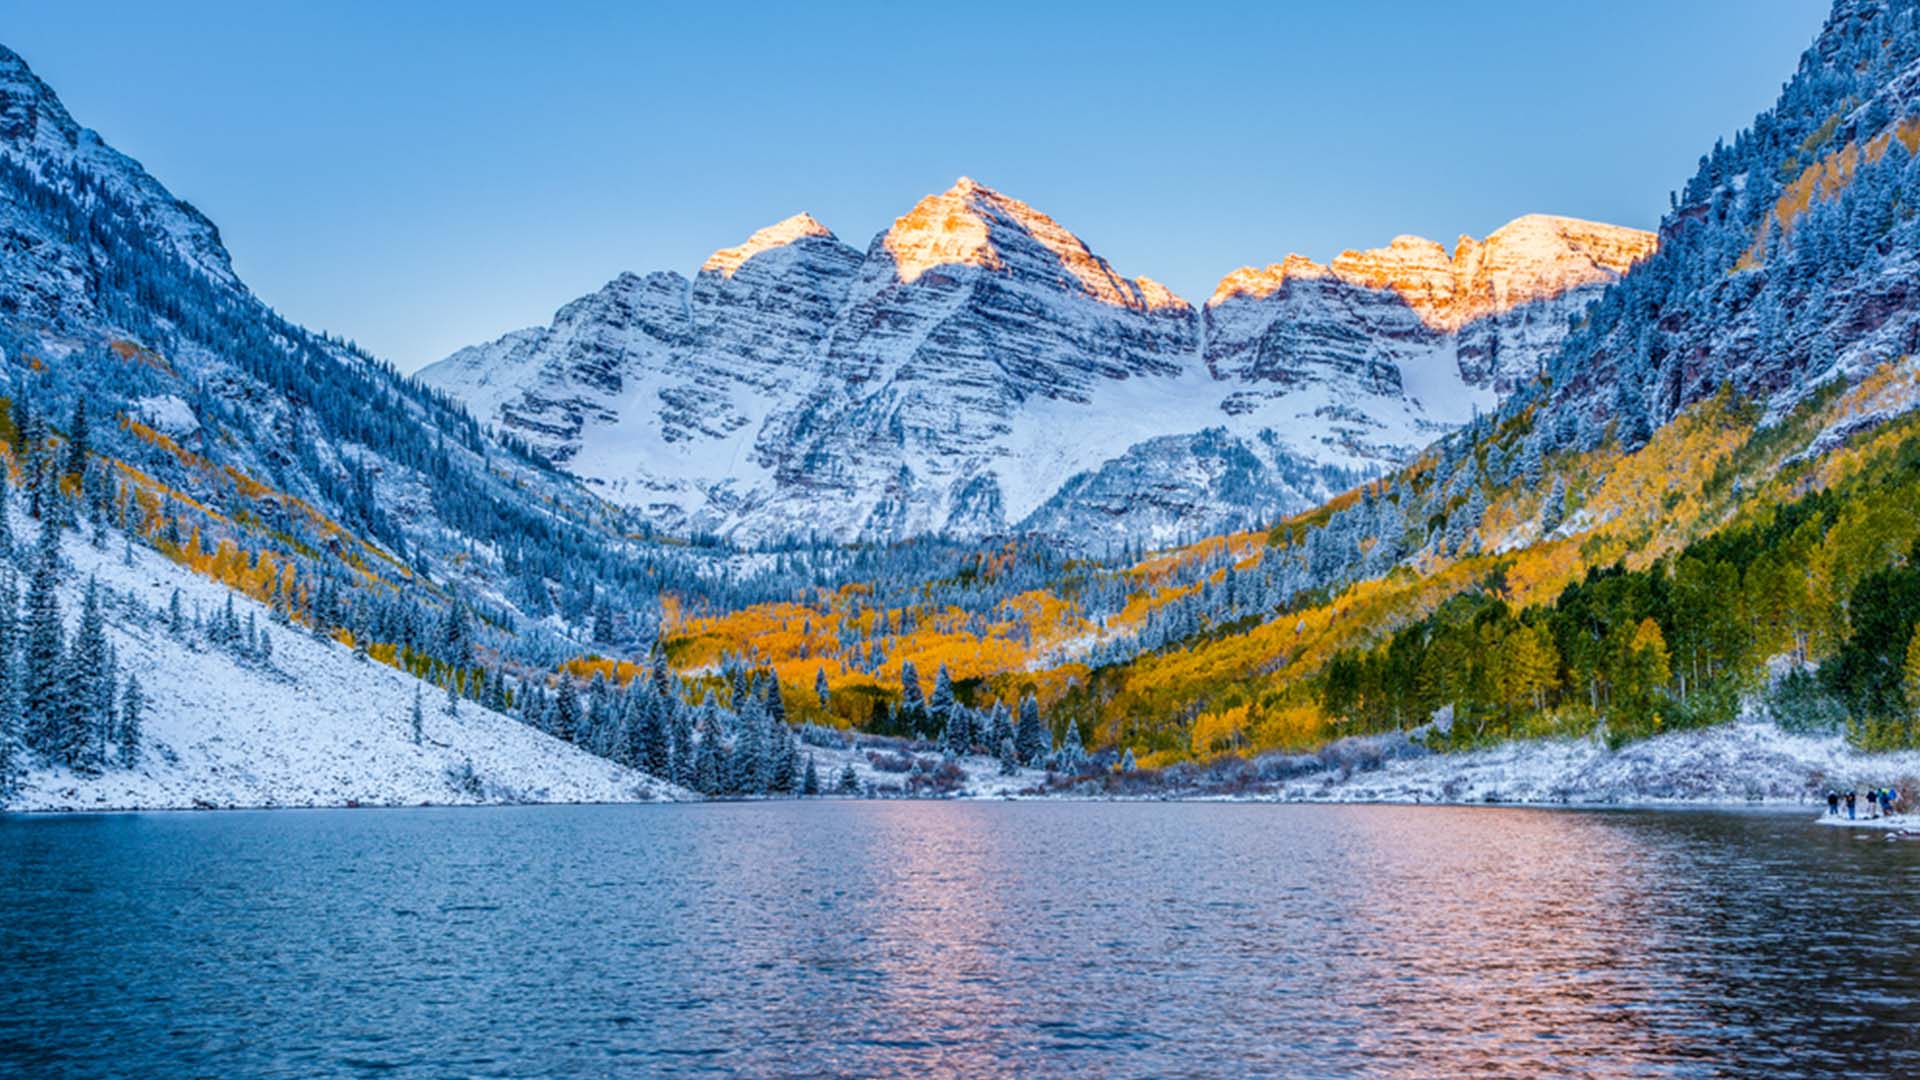 All About the Rocky Mountains National Park - TOMORROW'S WORLD TODAY®